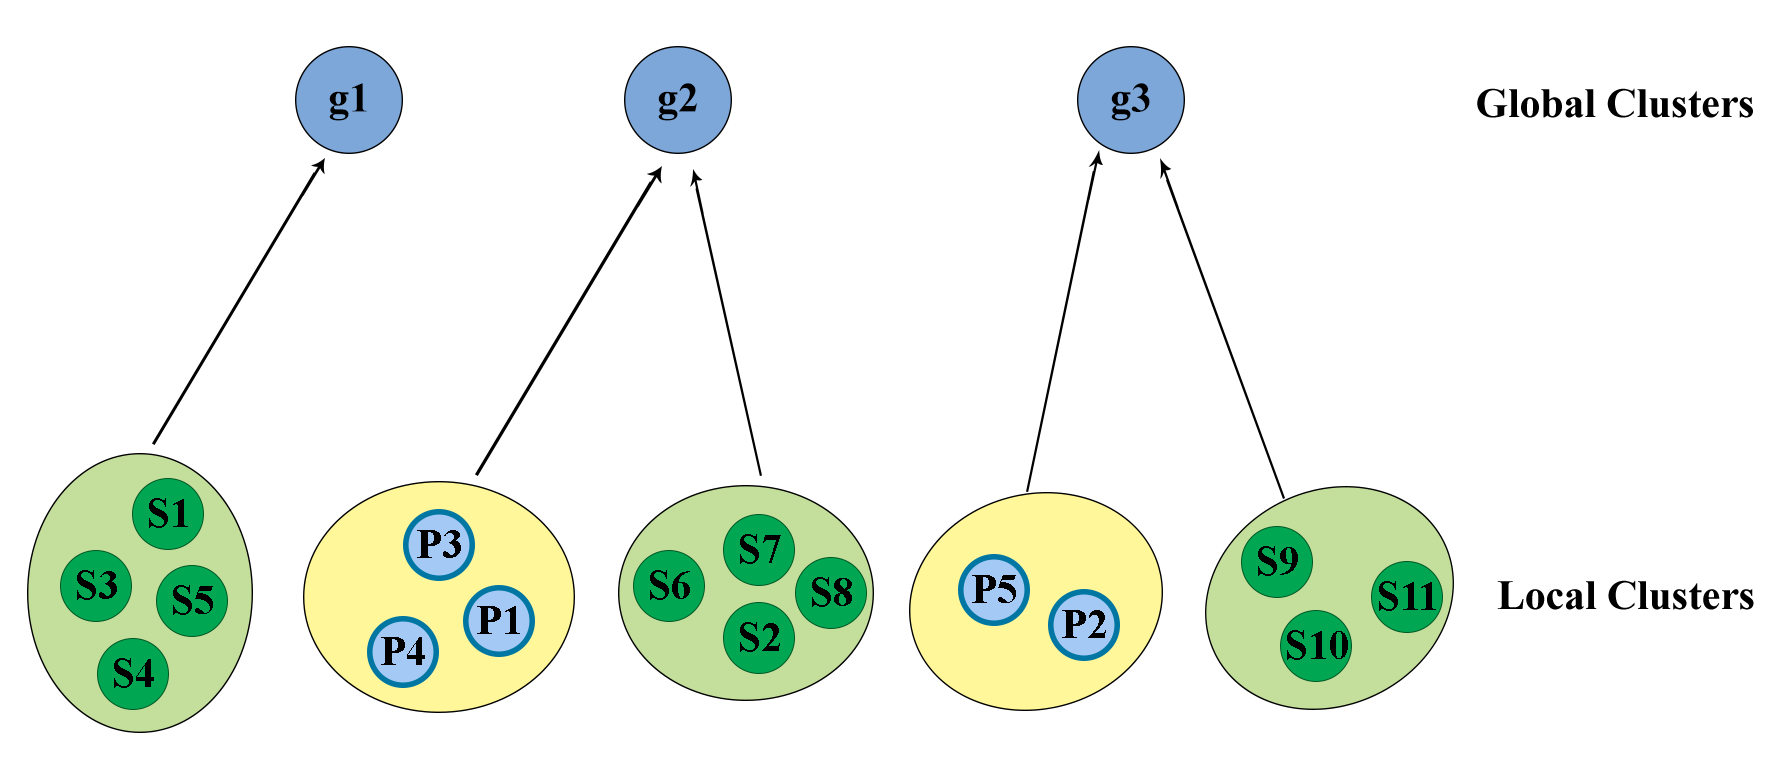 Illustrating the formation of HDP clusters.